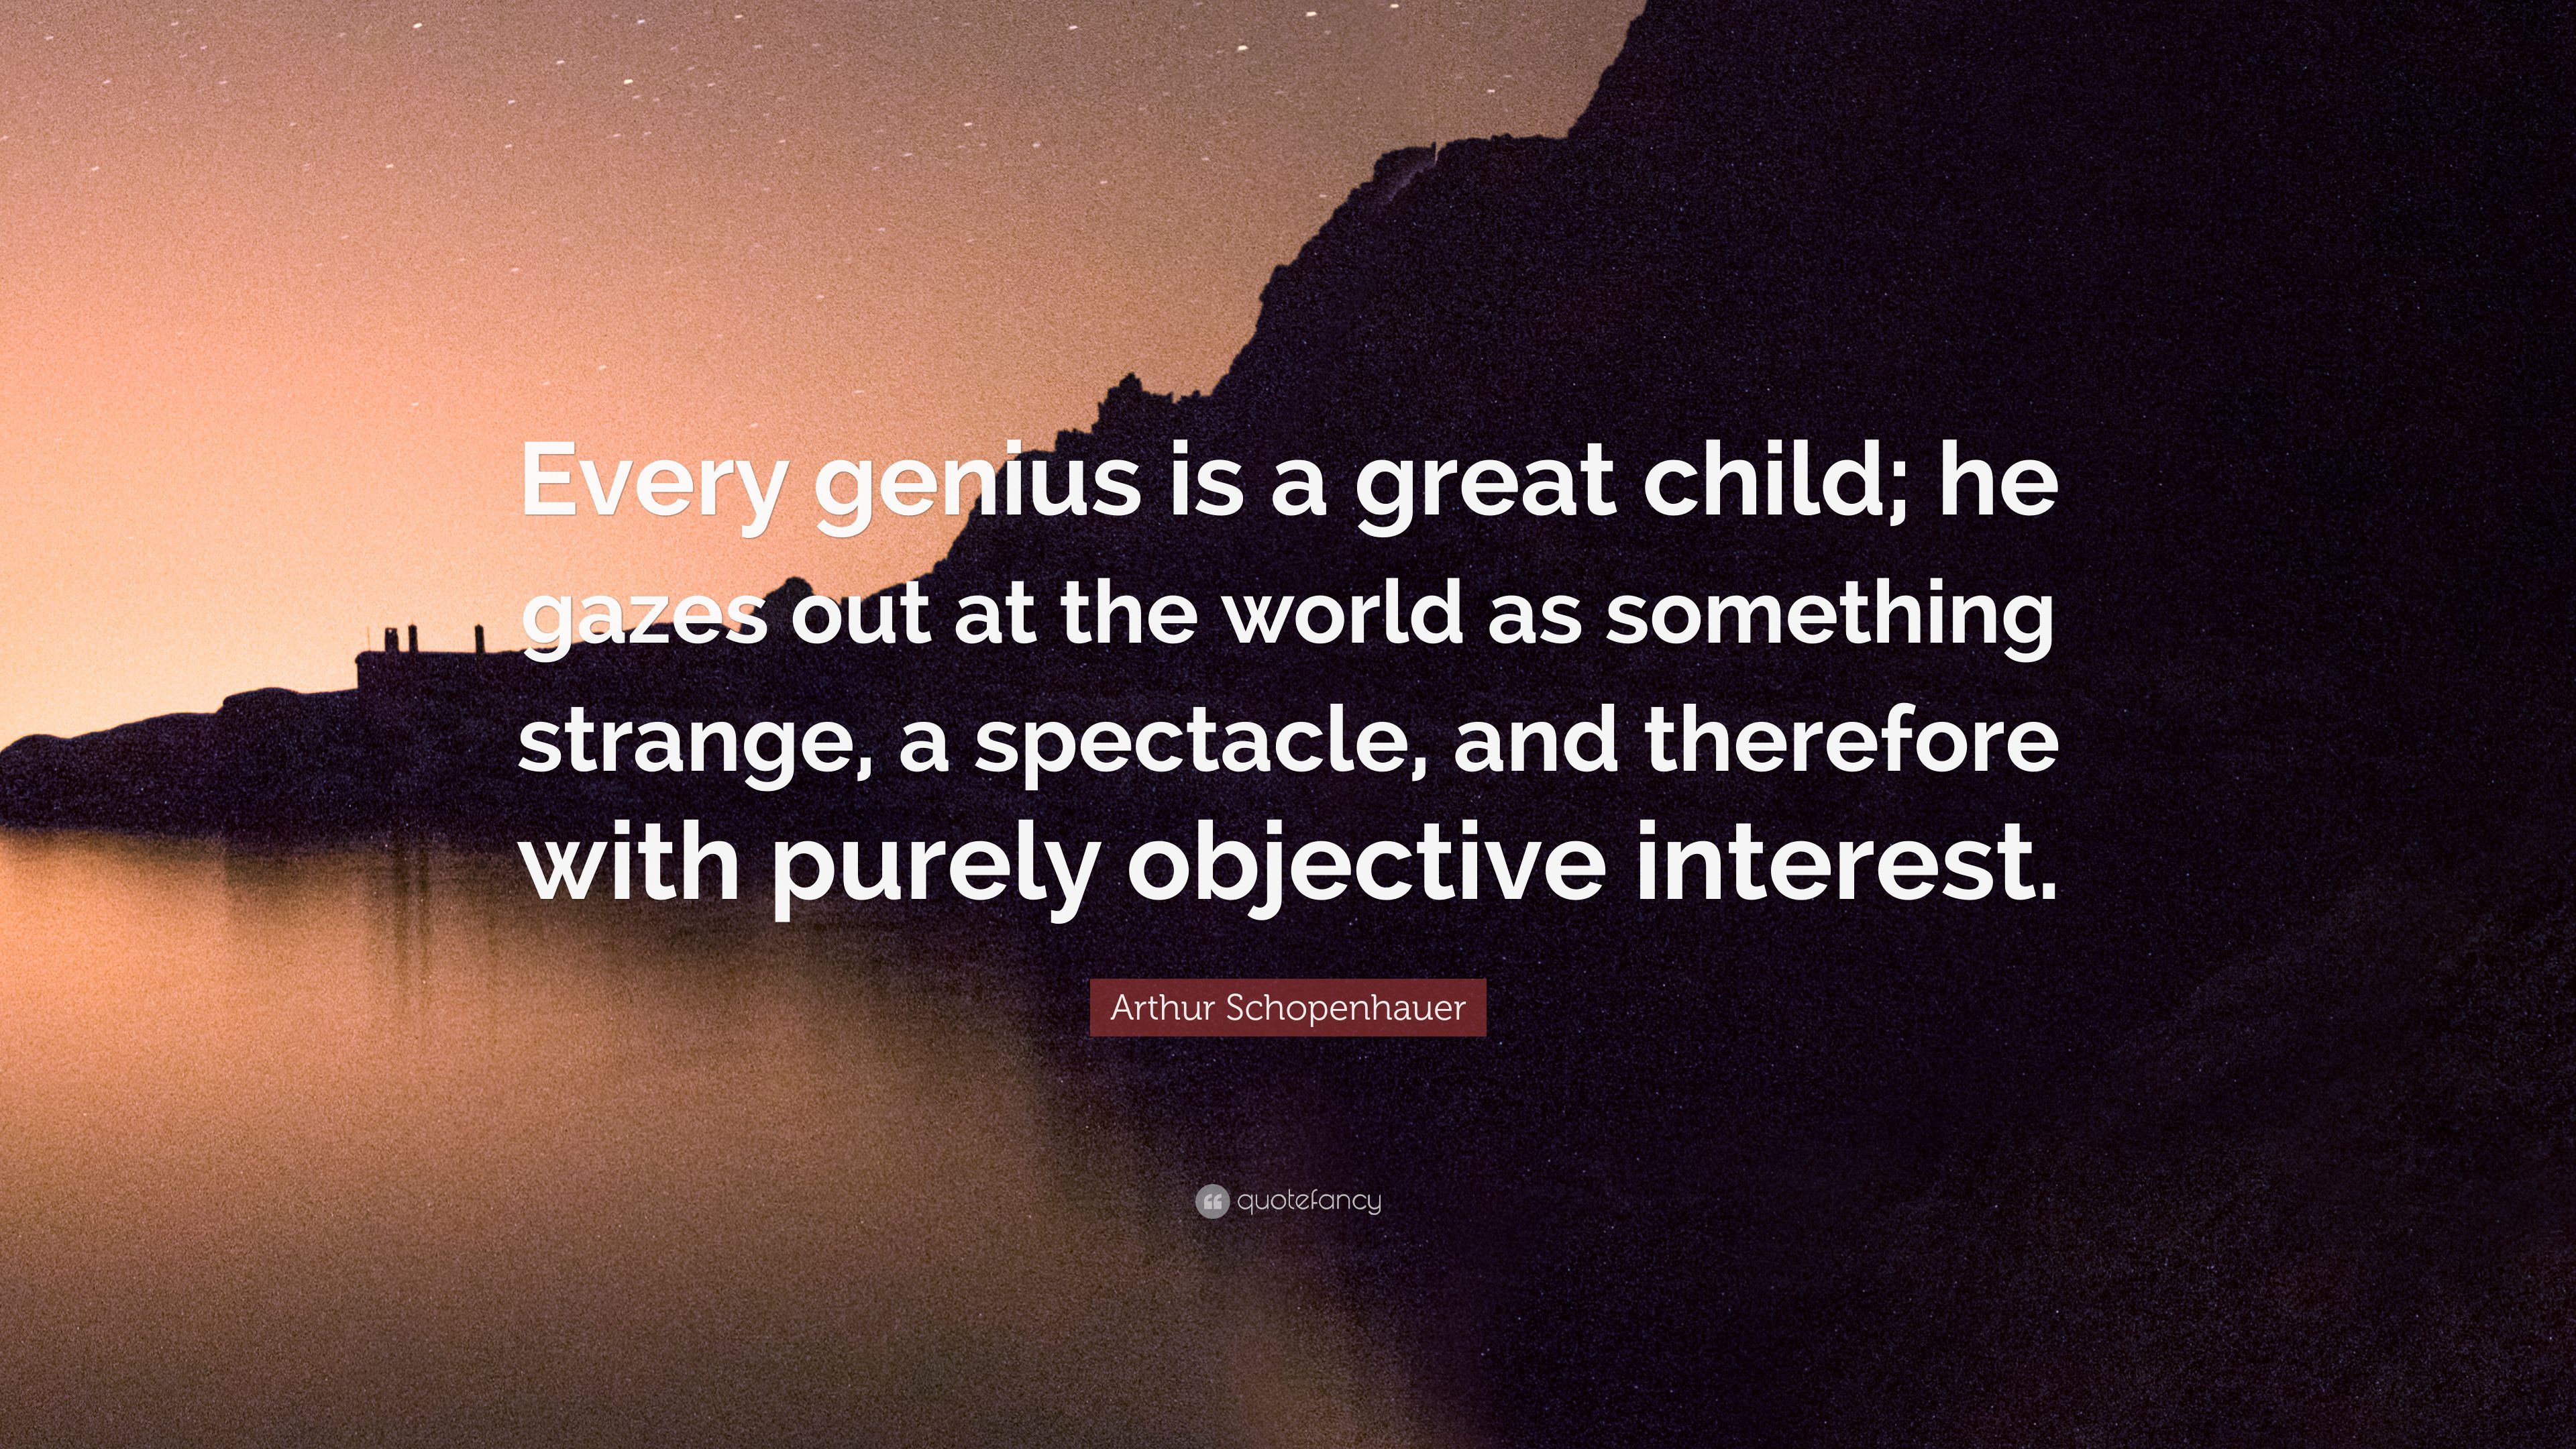 Arthur Schopenhauer Quote: “Every genius is a great child; he gazes out at the world as something strange, a spectacle, and therefore with purely ob.”